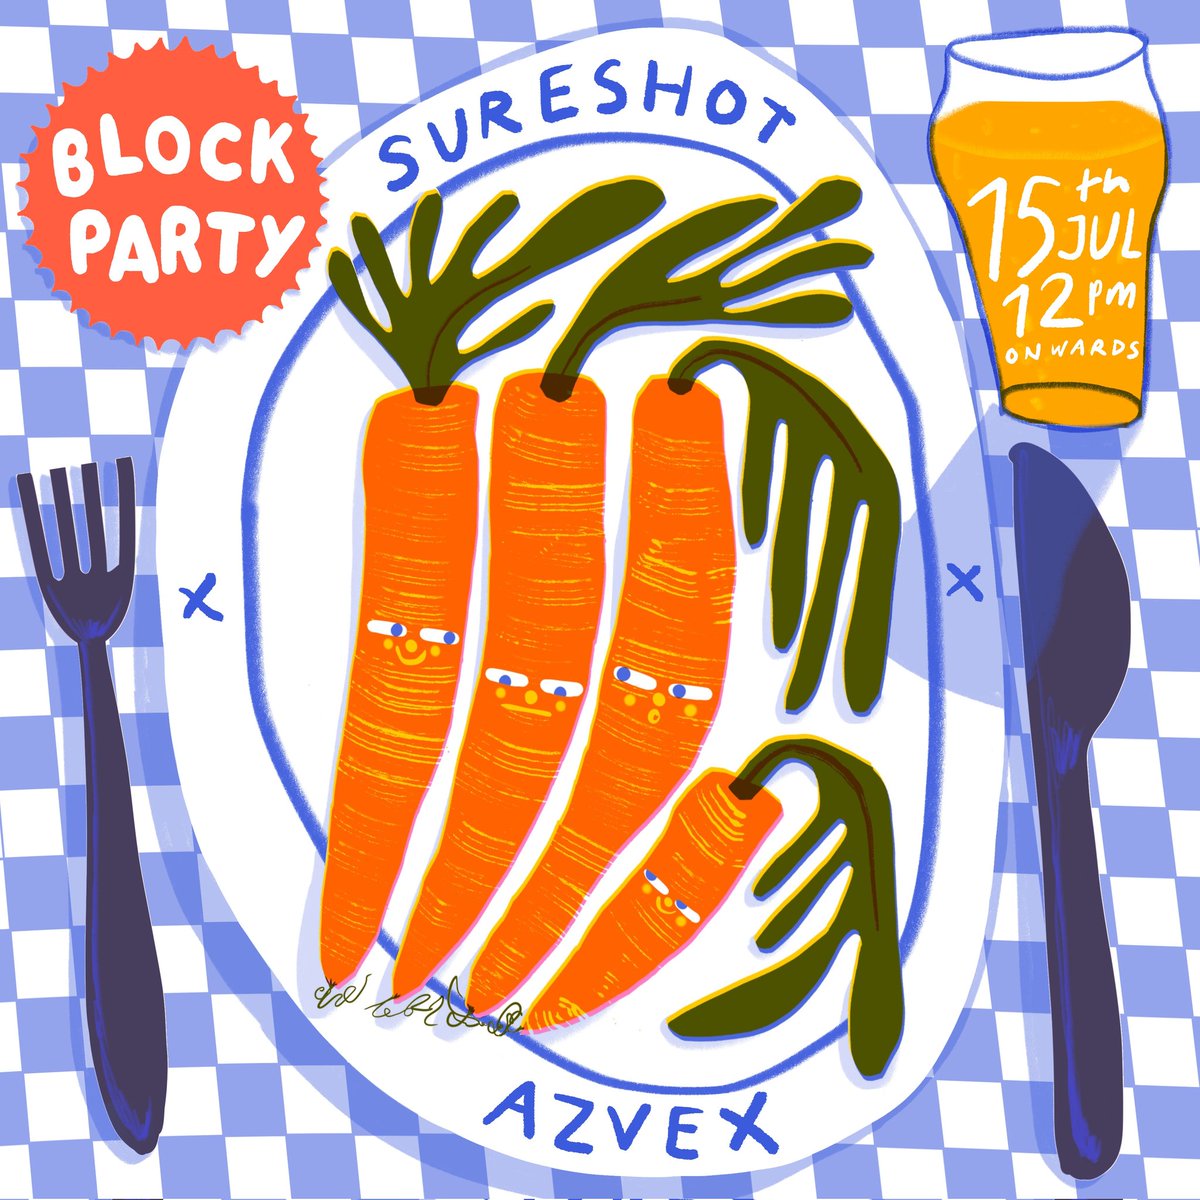 SURESHOT & AZVEX - At the Sureshot Tap we'll be hosting the crew from 'Pool, @azvexbrewing. Alongside food from The Little Sri Lankan and music courtesy of Vinyl Night Radio DJs! Plus we'll be pouring our collab brew with Azvex - The Power Of The Sun. ☀️